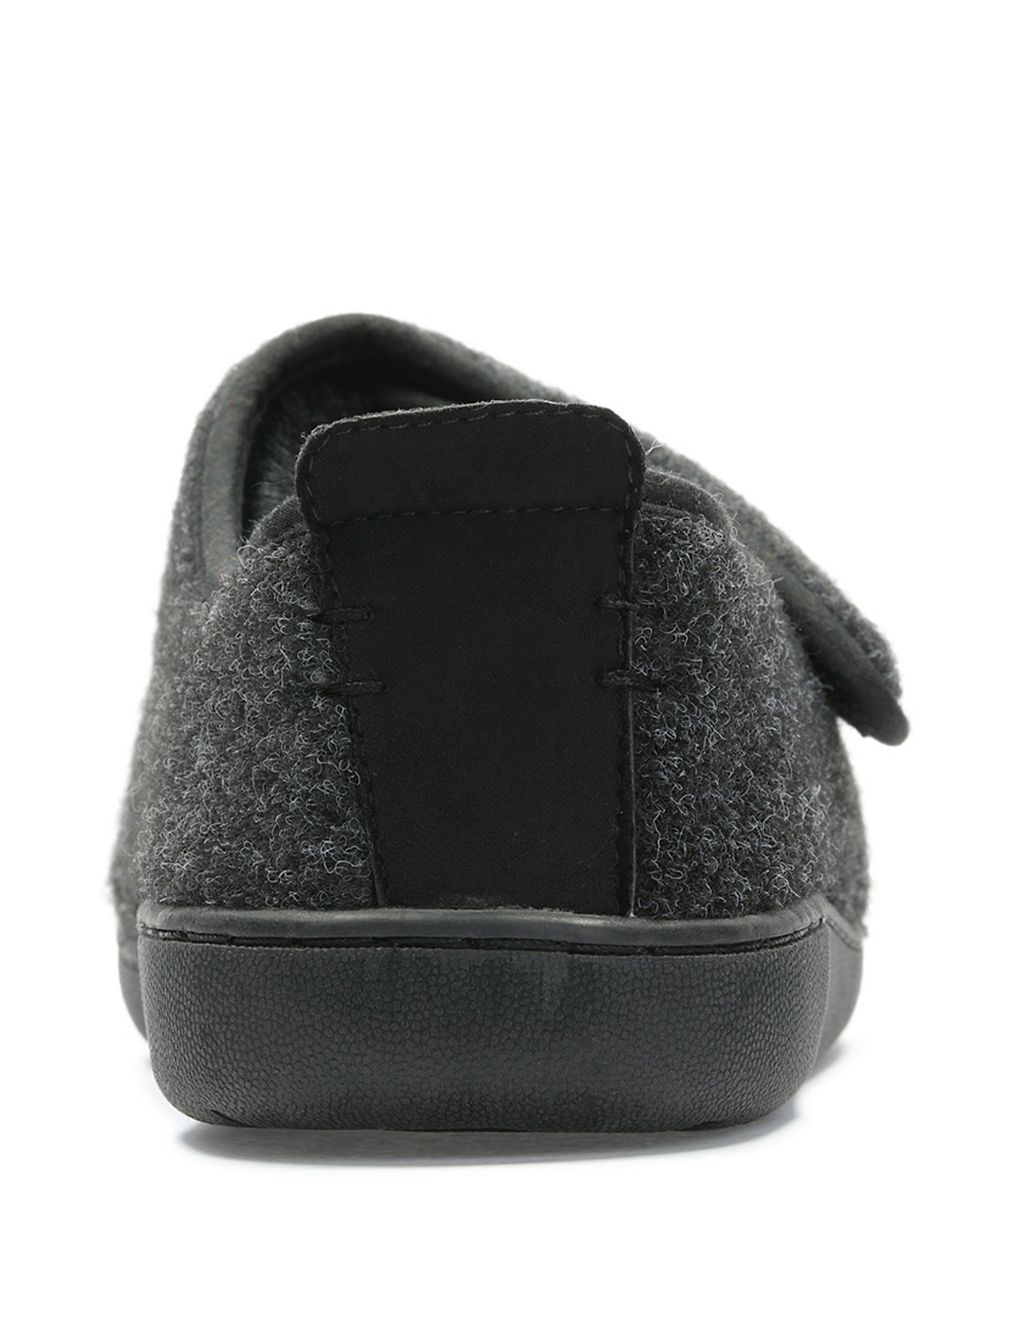 Riptape Moccasin Slippers 5 of 7